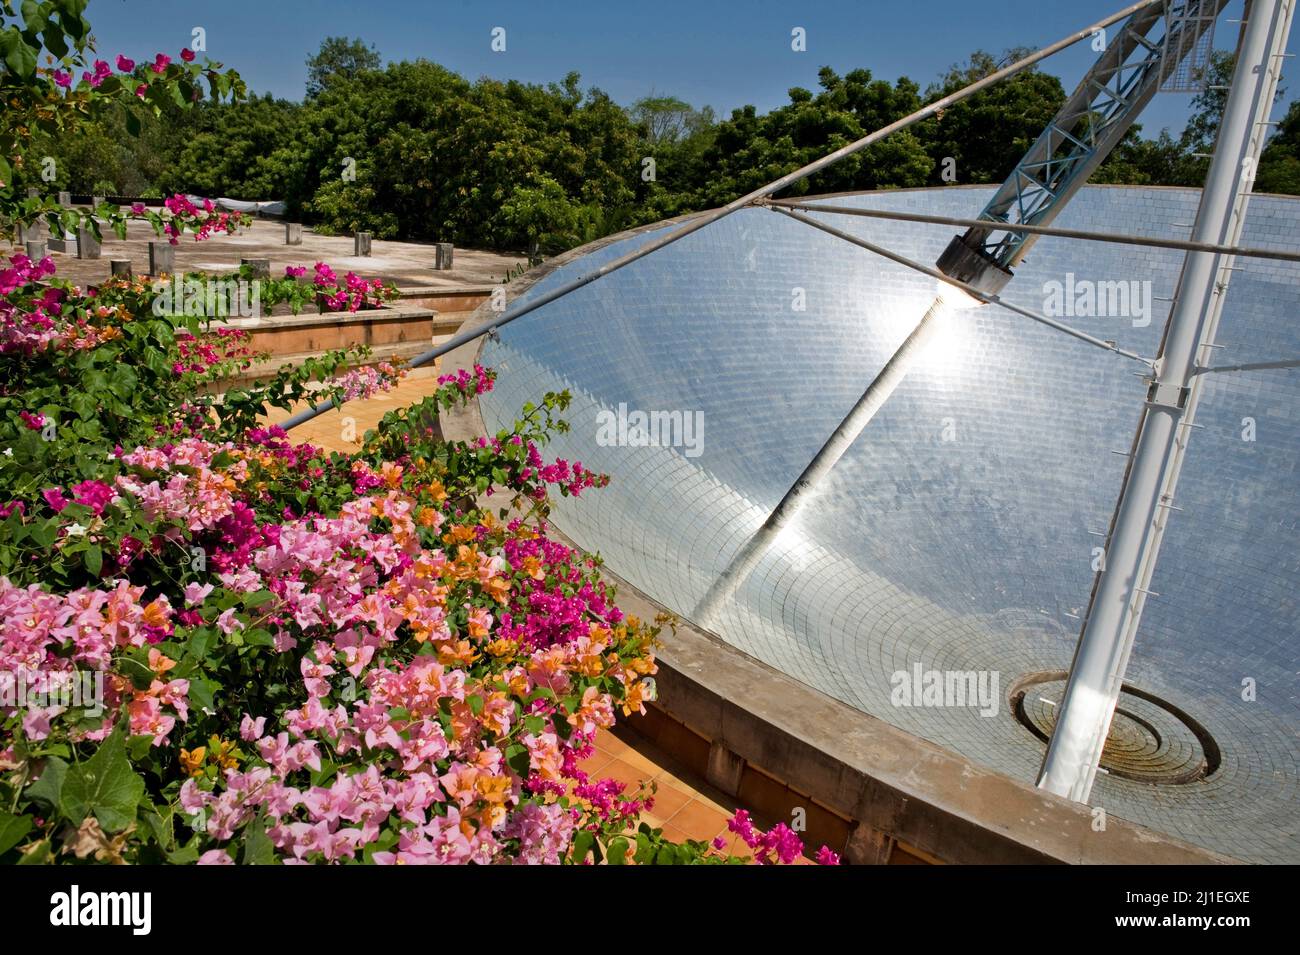 Auroville, India - August 2016: The Solar Bowl of the Solar Kitchen. It is 18 meters wide and helps to prepare lunch for more than 1000 meals per day. Stock Photo